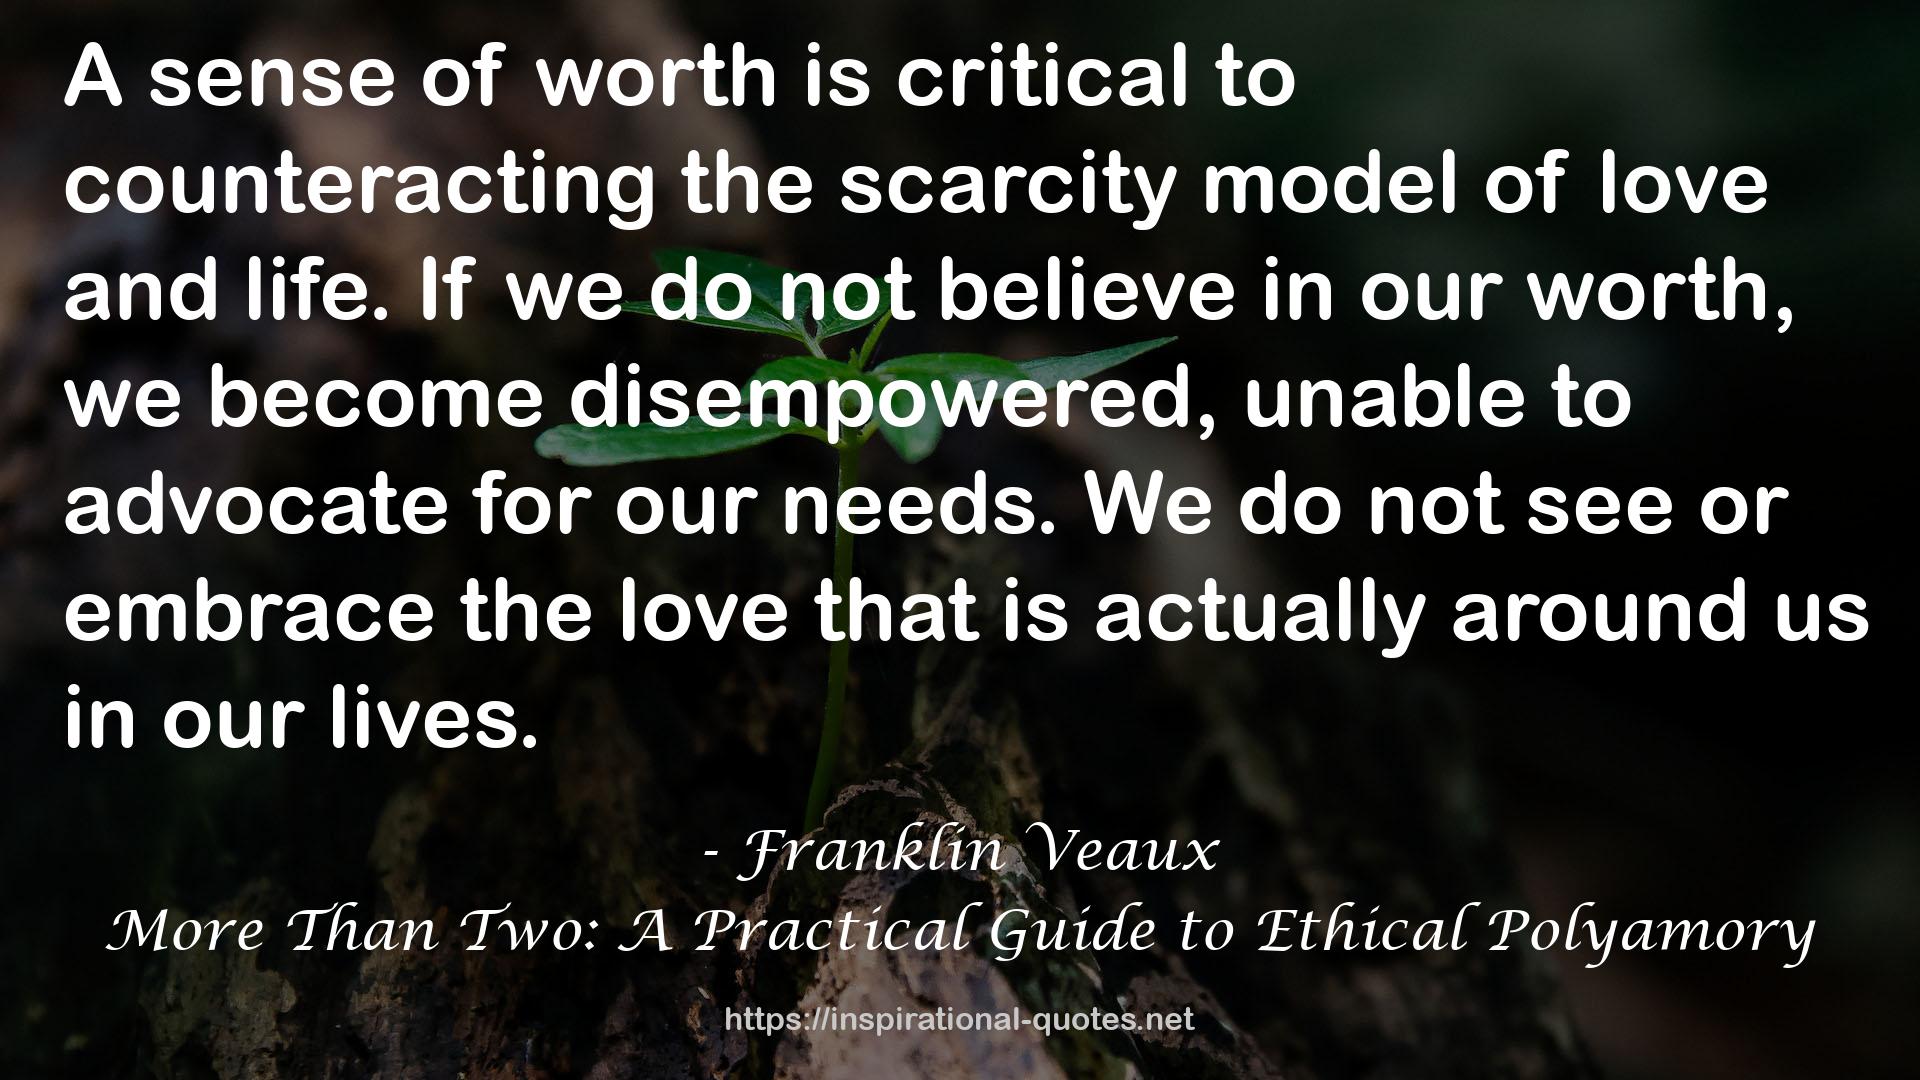 More Than Two: A Practical Guide to Ethical Polyamory QUOTES